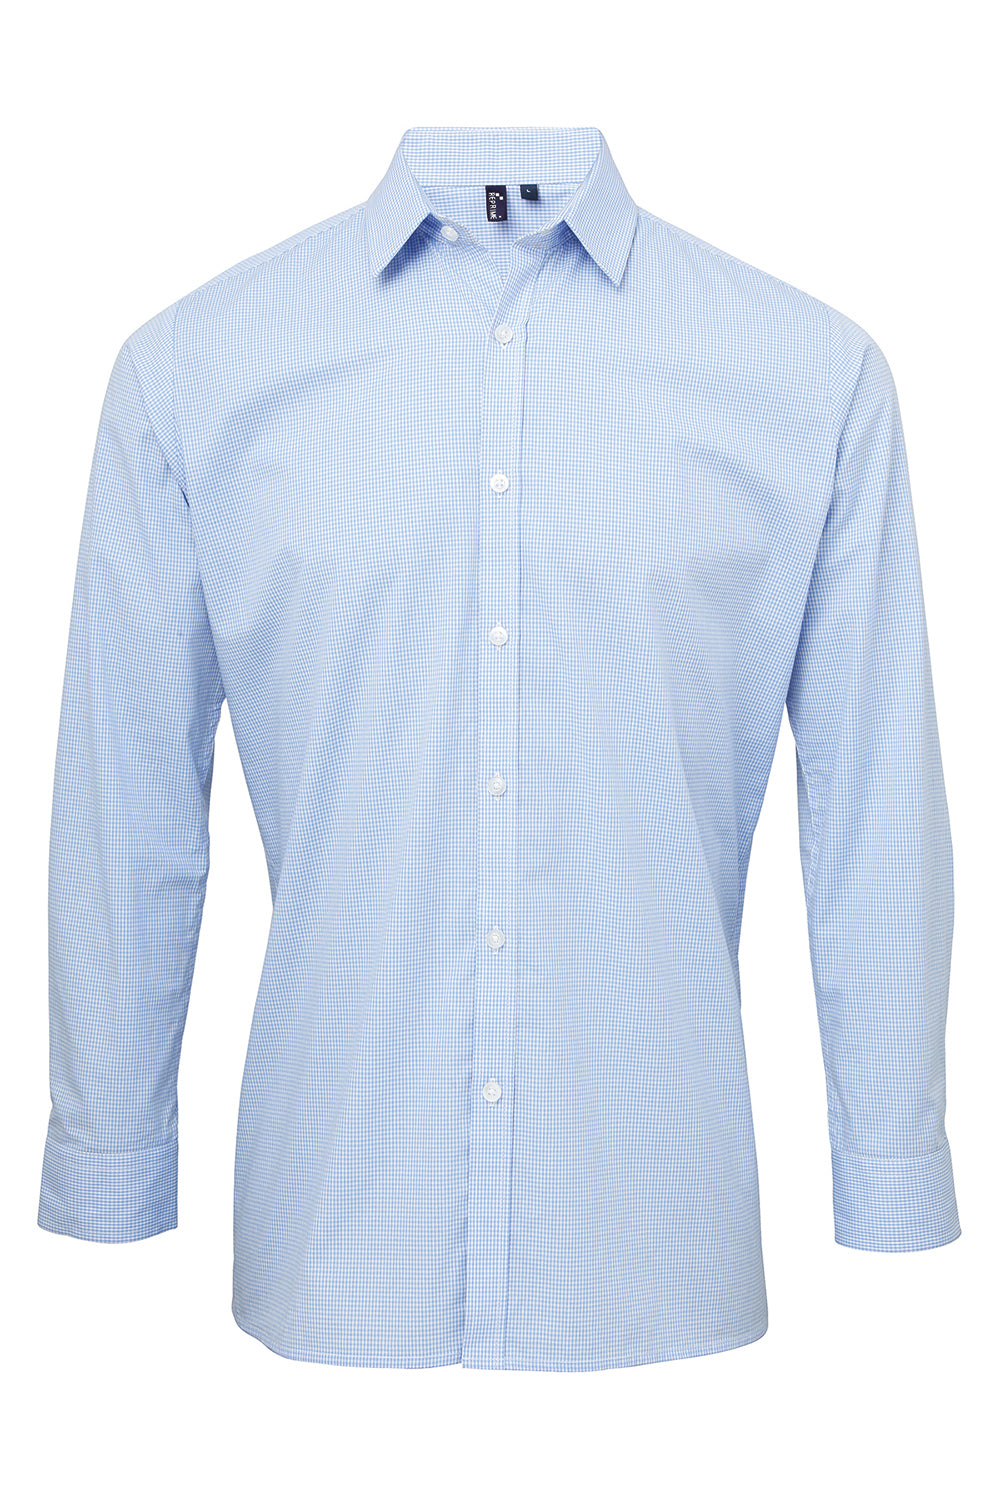 Artisan Collection RP220 Mens Microcheck Gingham Long Sleeve Button Down Shirt Light Blue/White Model Flat Front